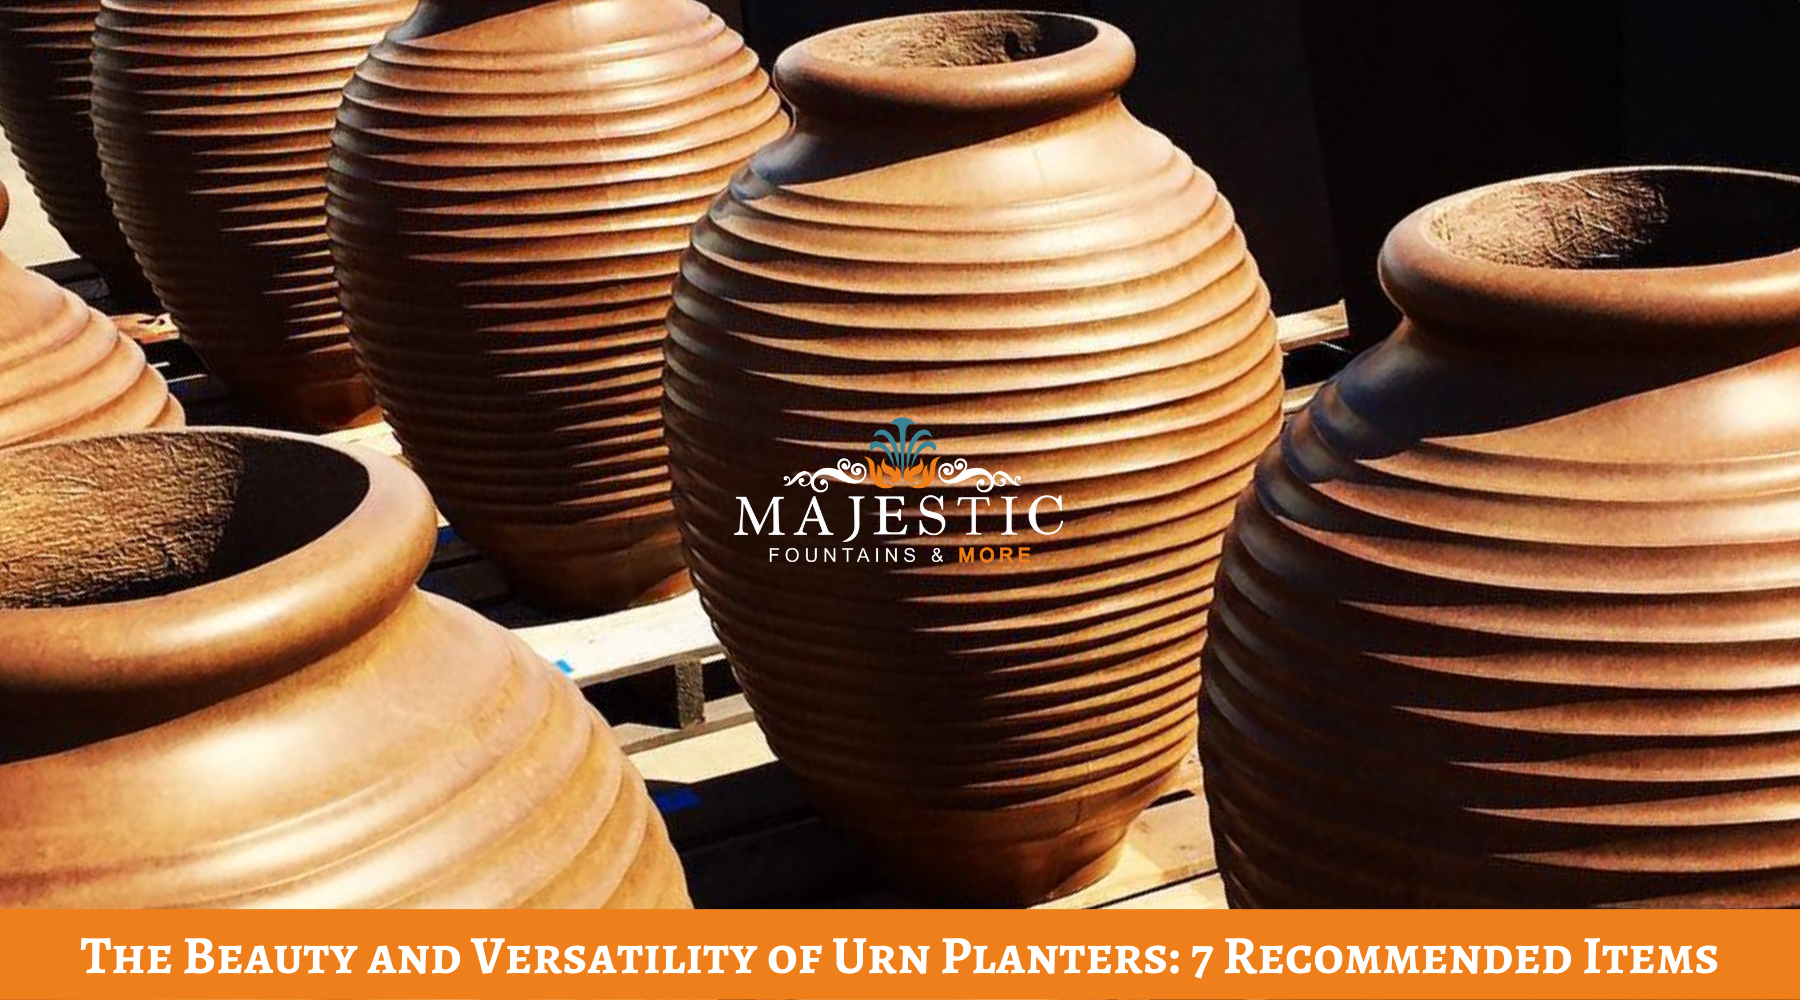 The Beauty and Versatility of Urn Planters: 7 Recommended Items